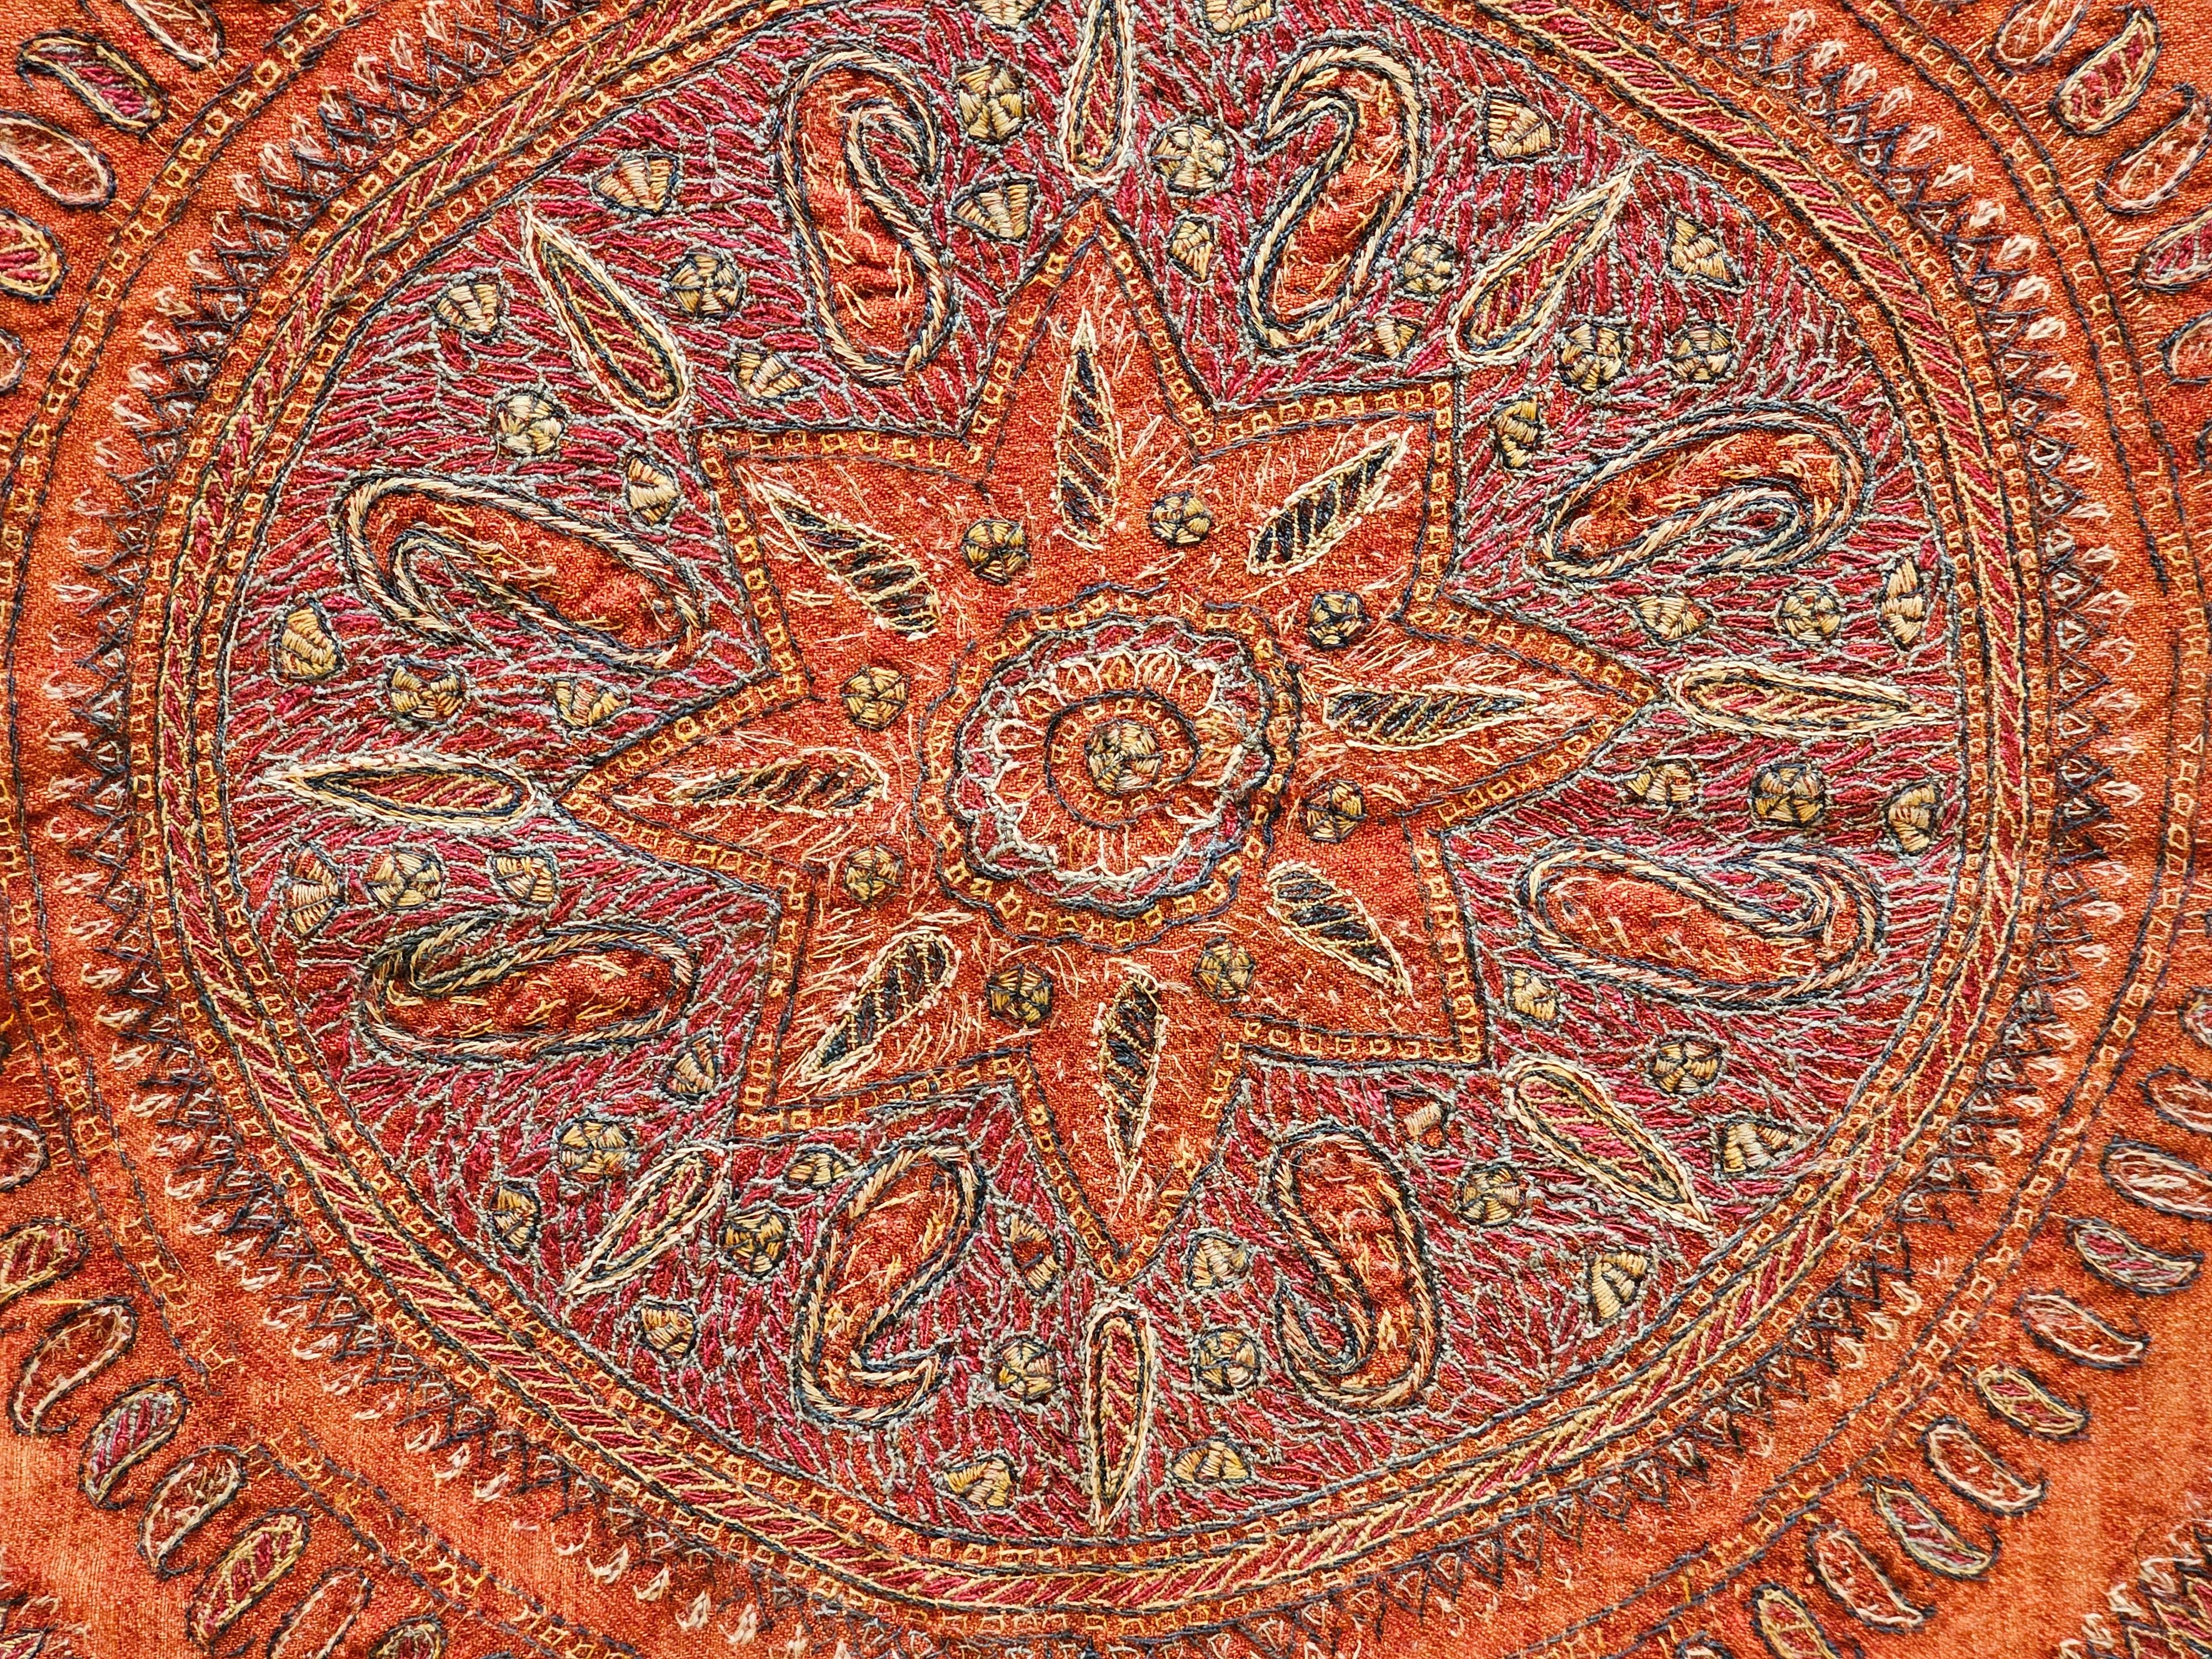 19th Century Persian Kerman Termeh Silk Embroidery Suzani in Red, Blue, Ivory In Good Condition For Sale In Barrington, IL